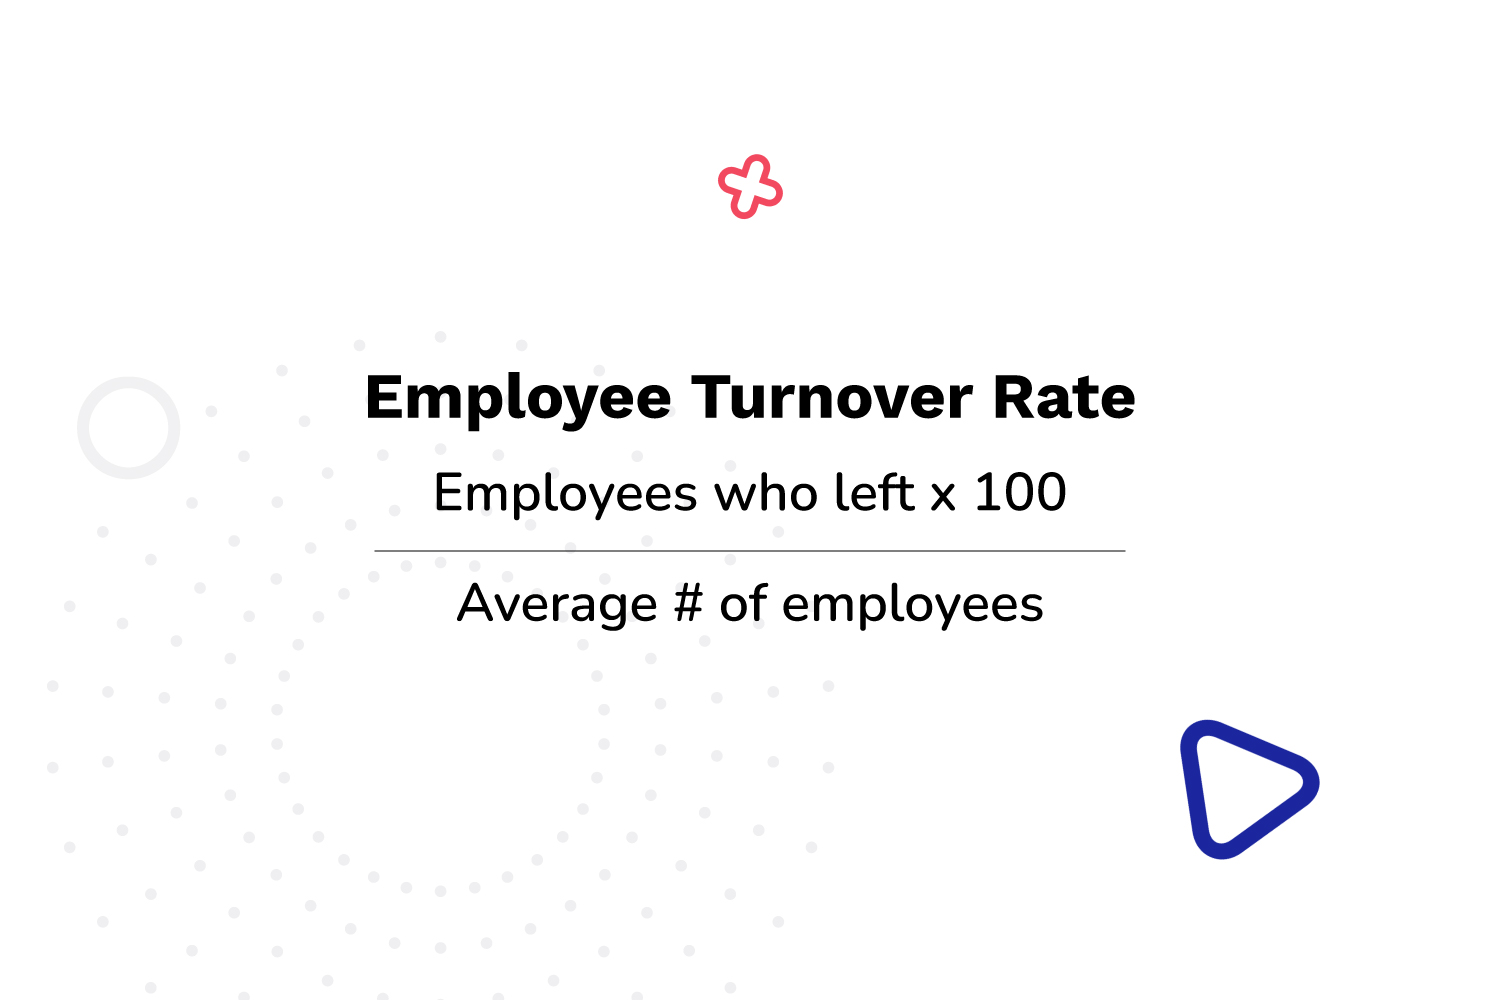 employee turnover rate equals employees who left times 100 divided by average number of employees